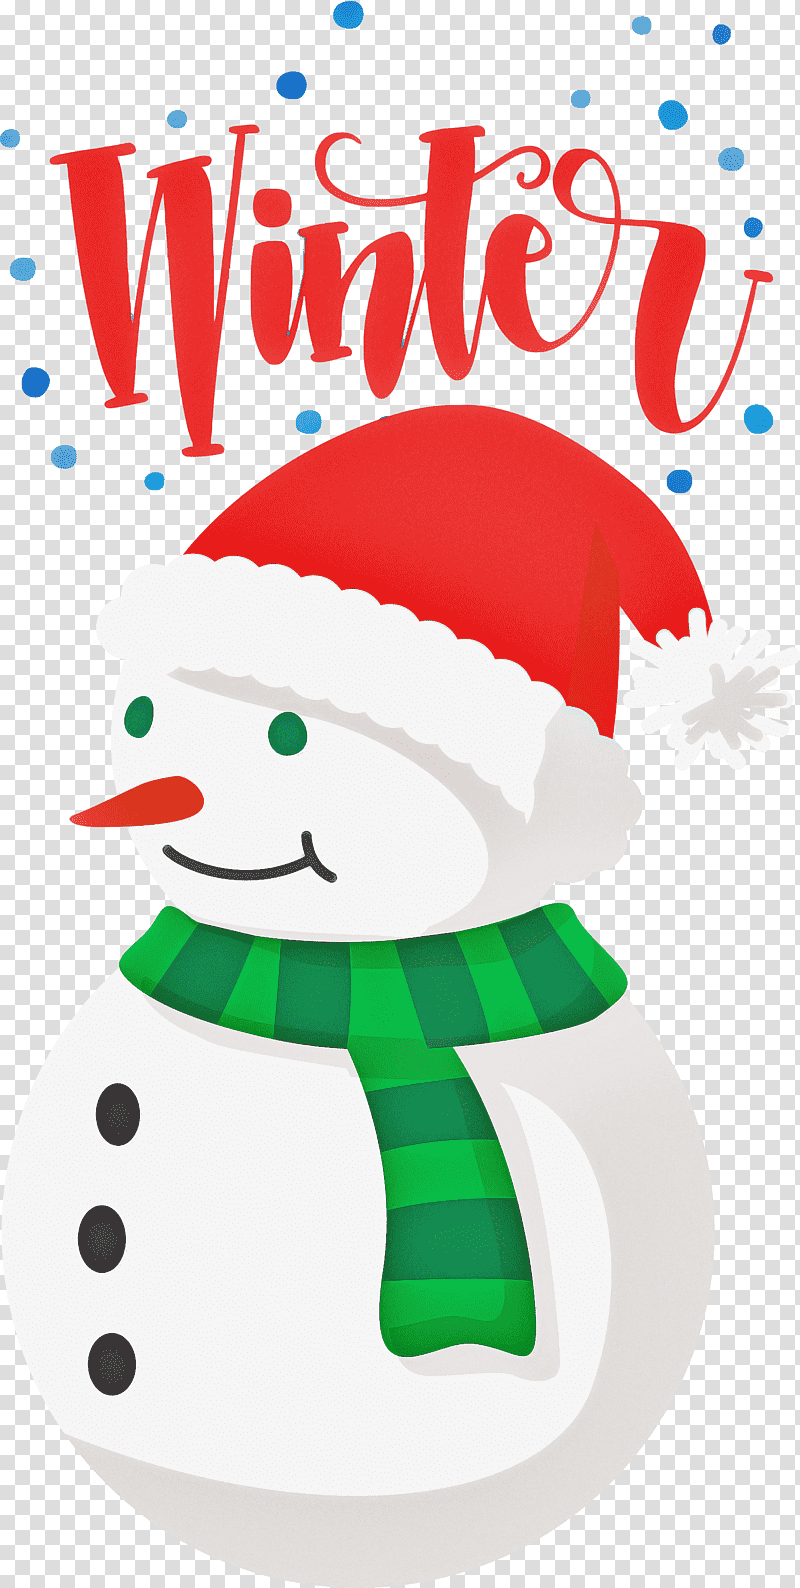 Hello Winter Welcome Winter Winter, Winter
, Plotter, Christmas Day, Can I Go To The Washroom Please, Christmas Ornament M, Christmas Tree transparent background PNG clipart